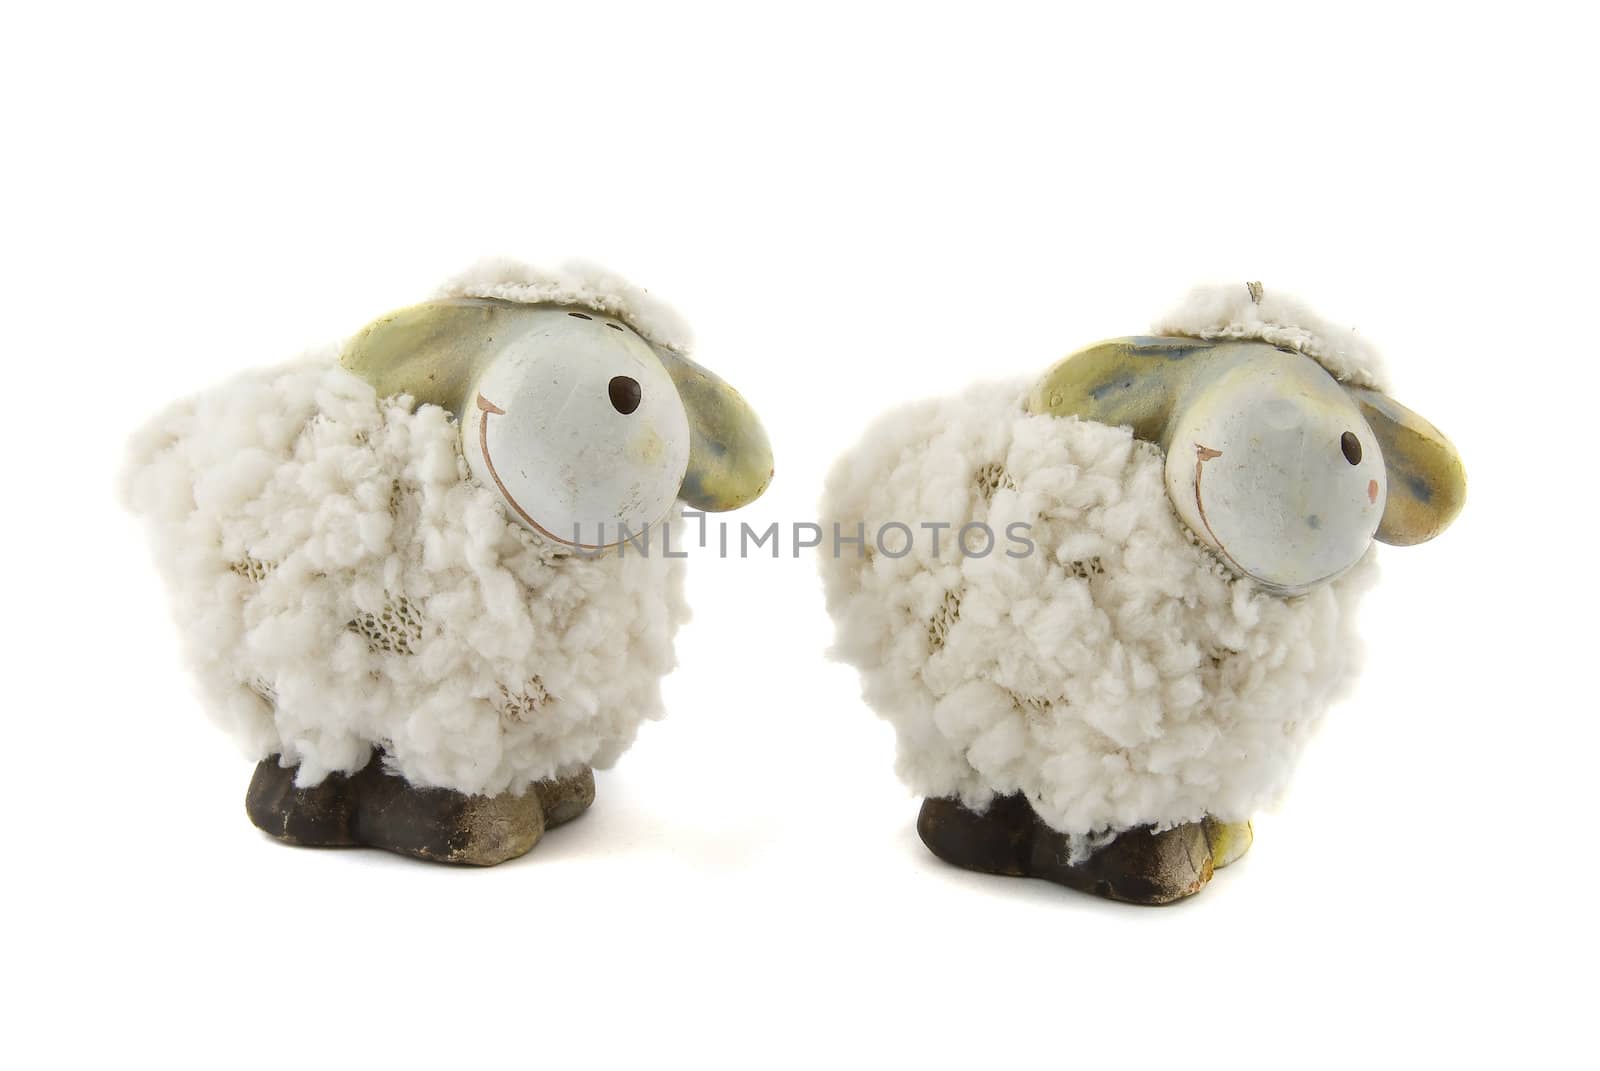 Two sheep toy isolated on the white background.